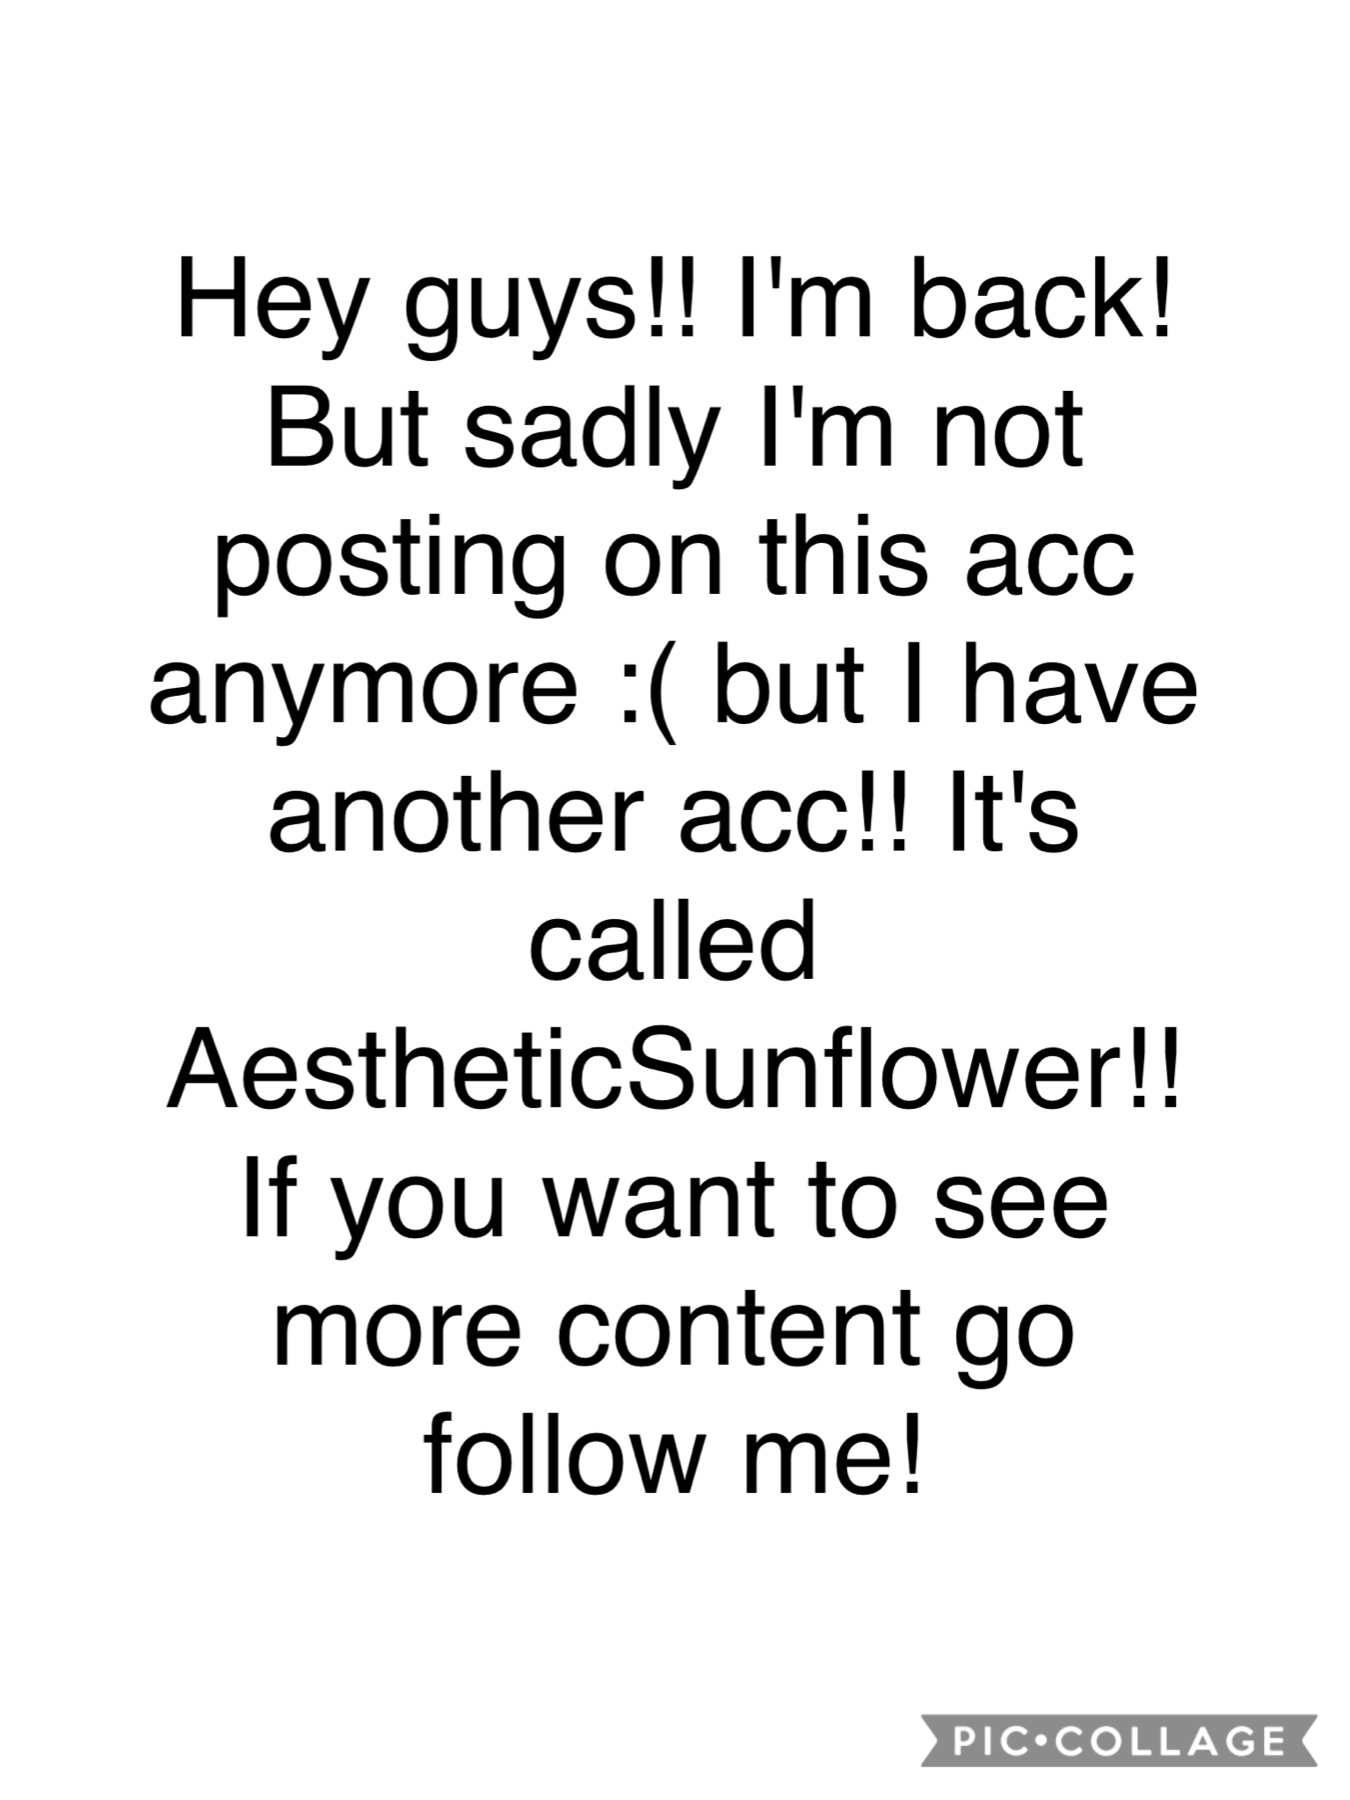 Tap

I'm back! Just not on this acc :( it's called AestheticSunflower! I'll comment on this video so it's easier to find me :)